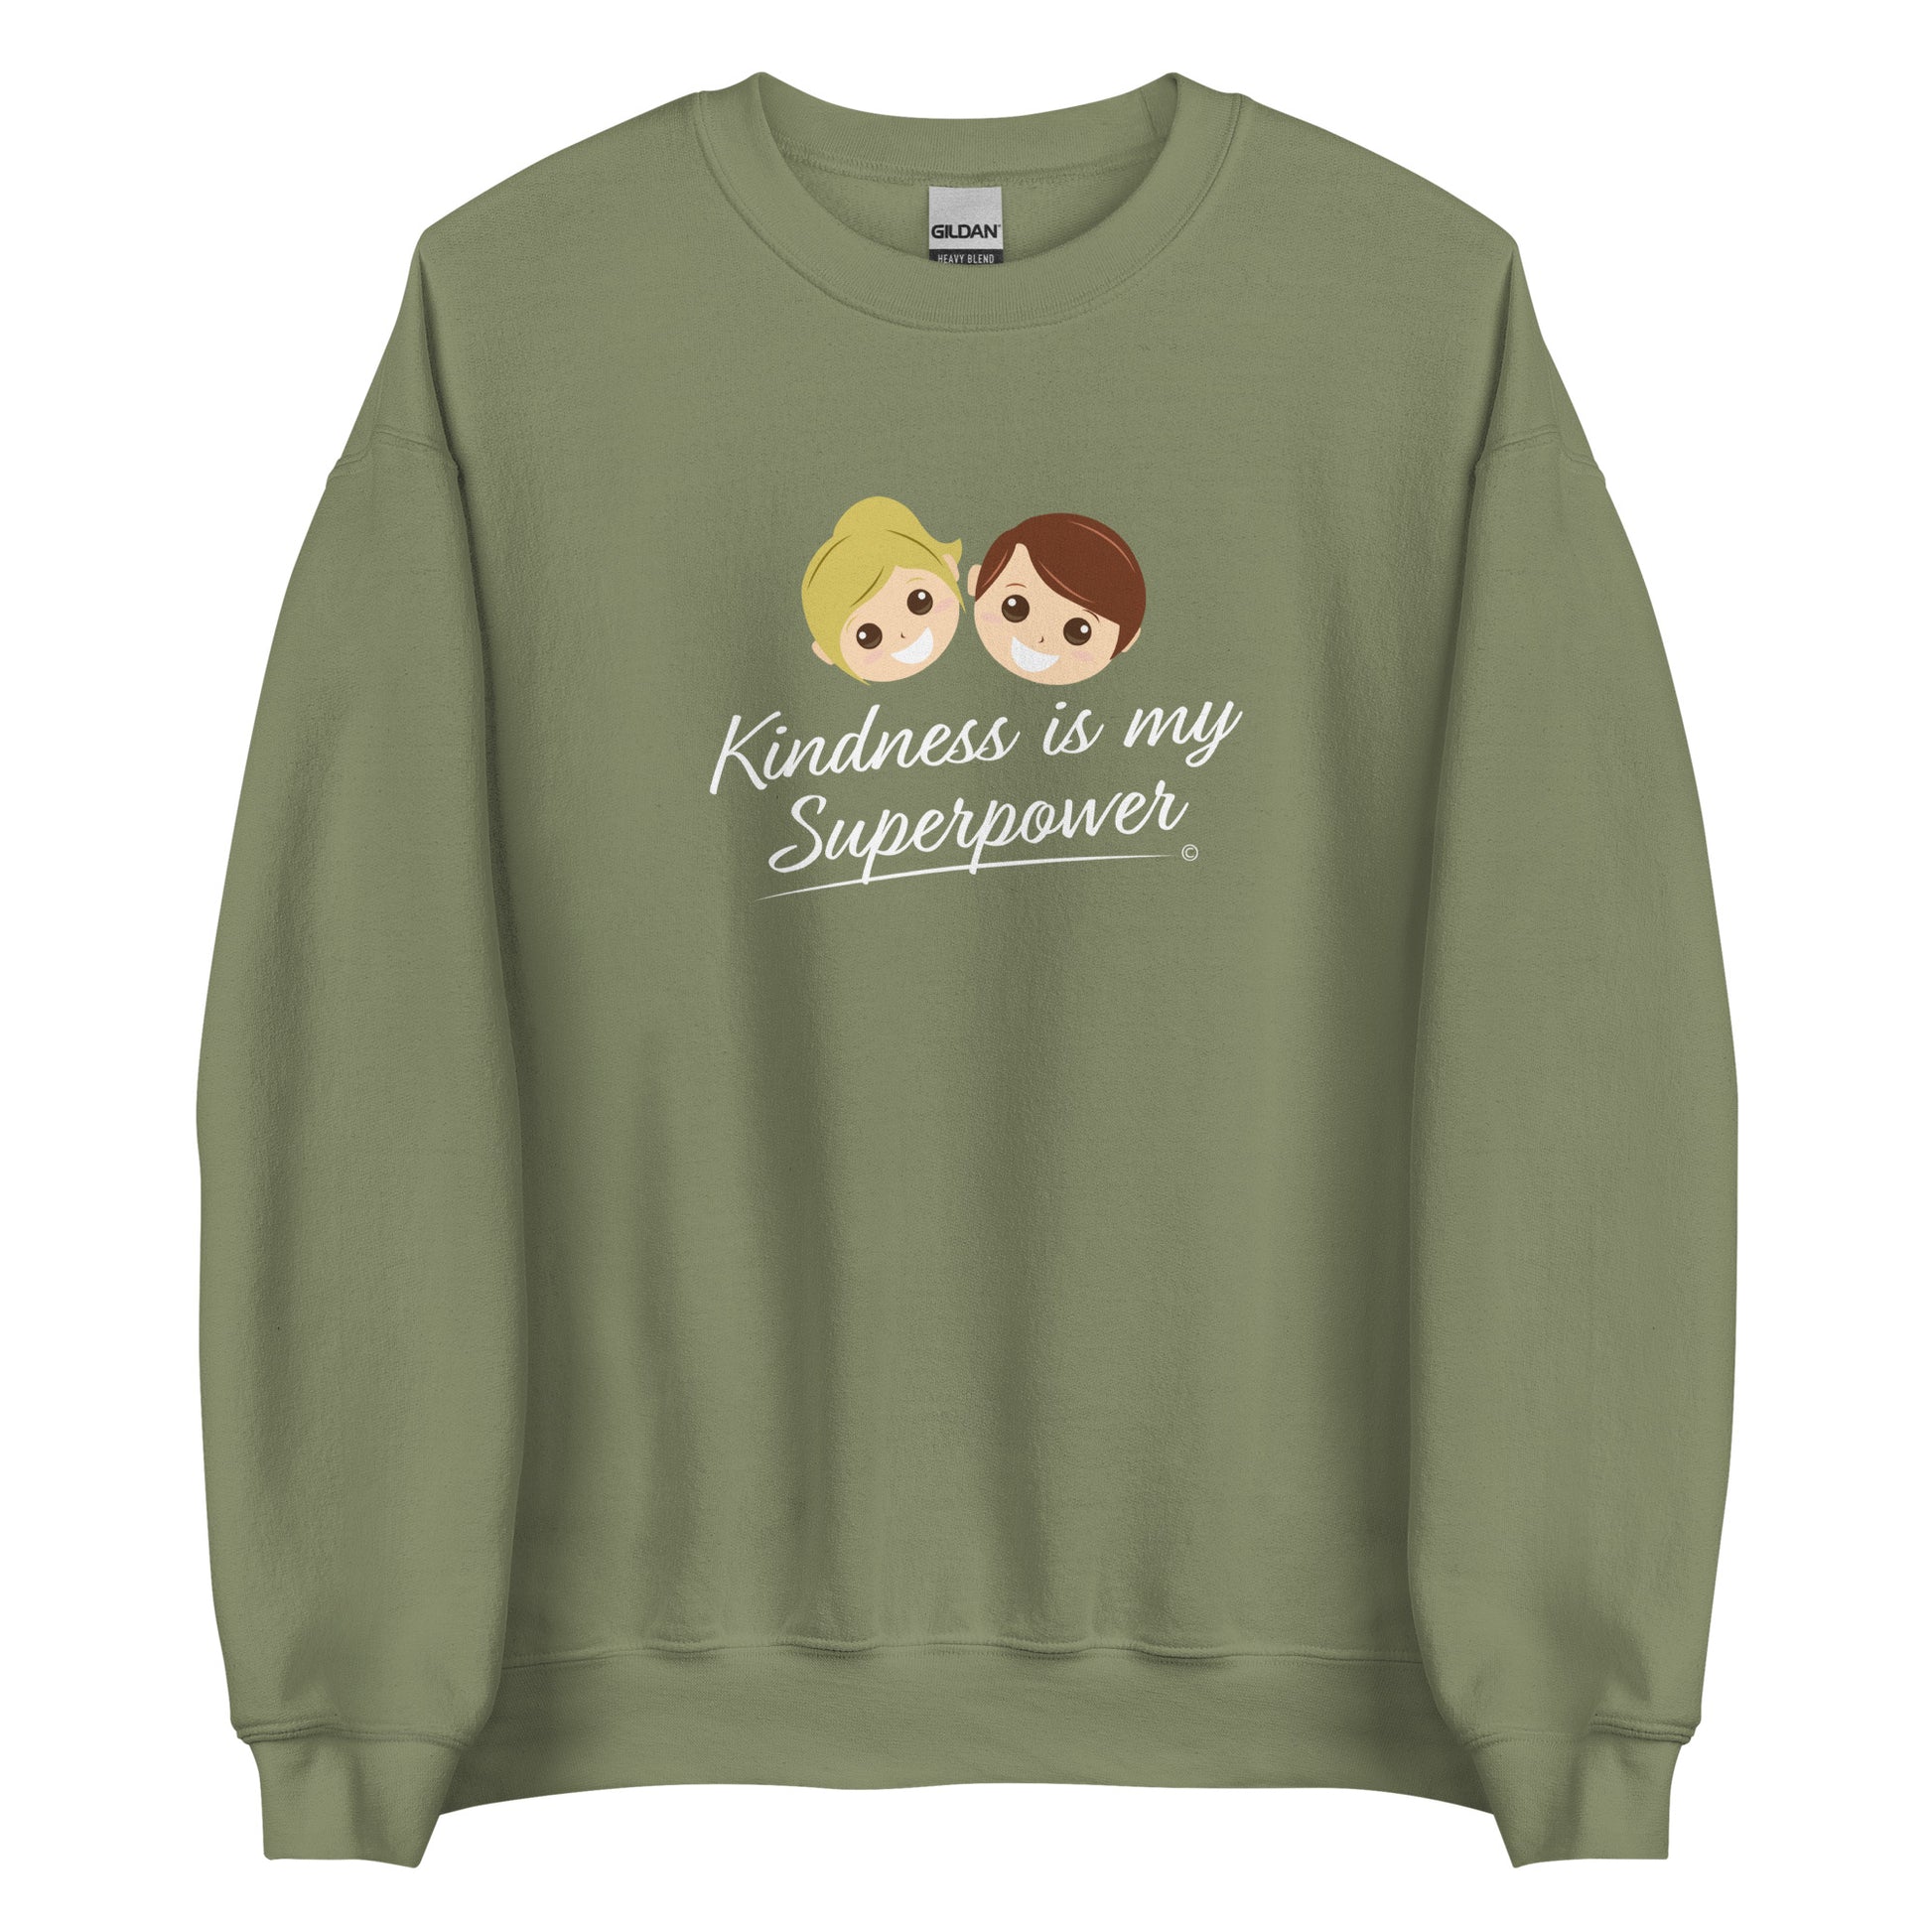 A cozy unisex sweatshirt in military green featuring the uplifting quote 'Kindness is my Superpower' in bold lettering.